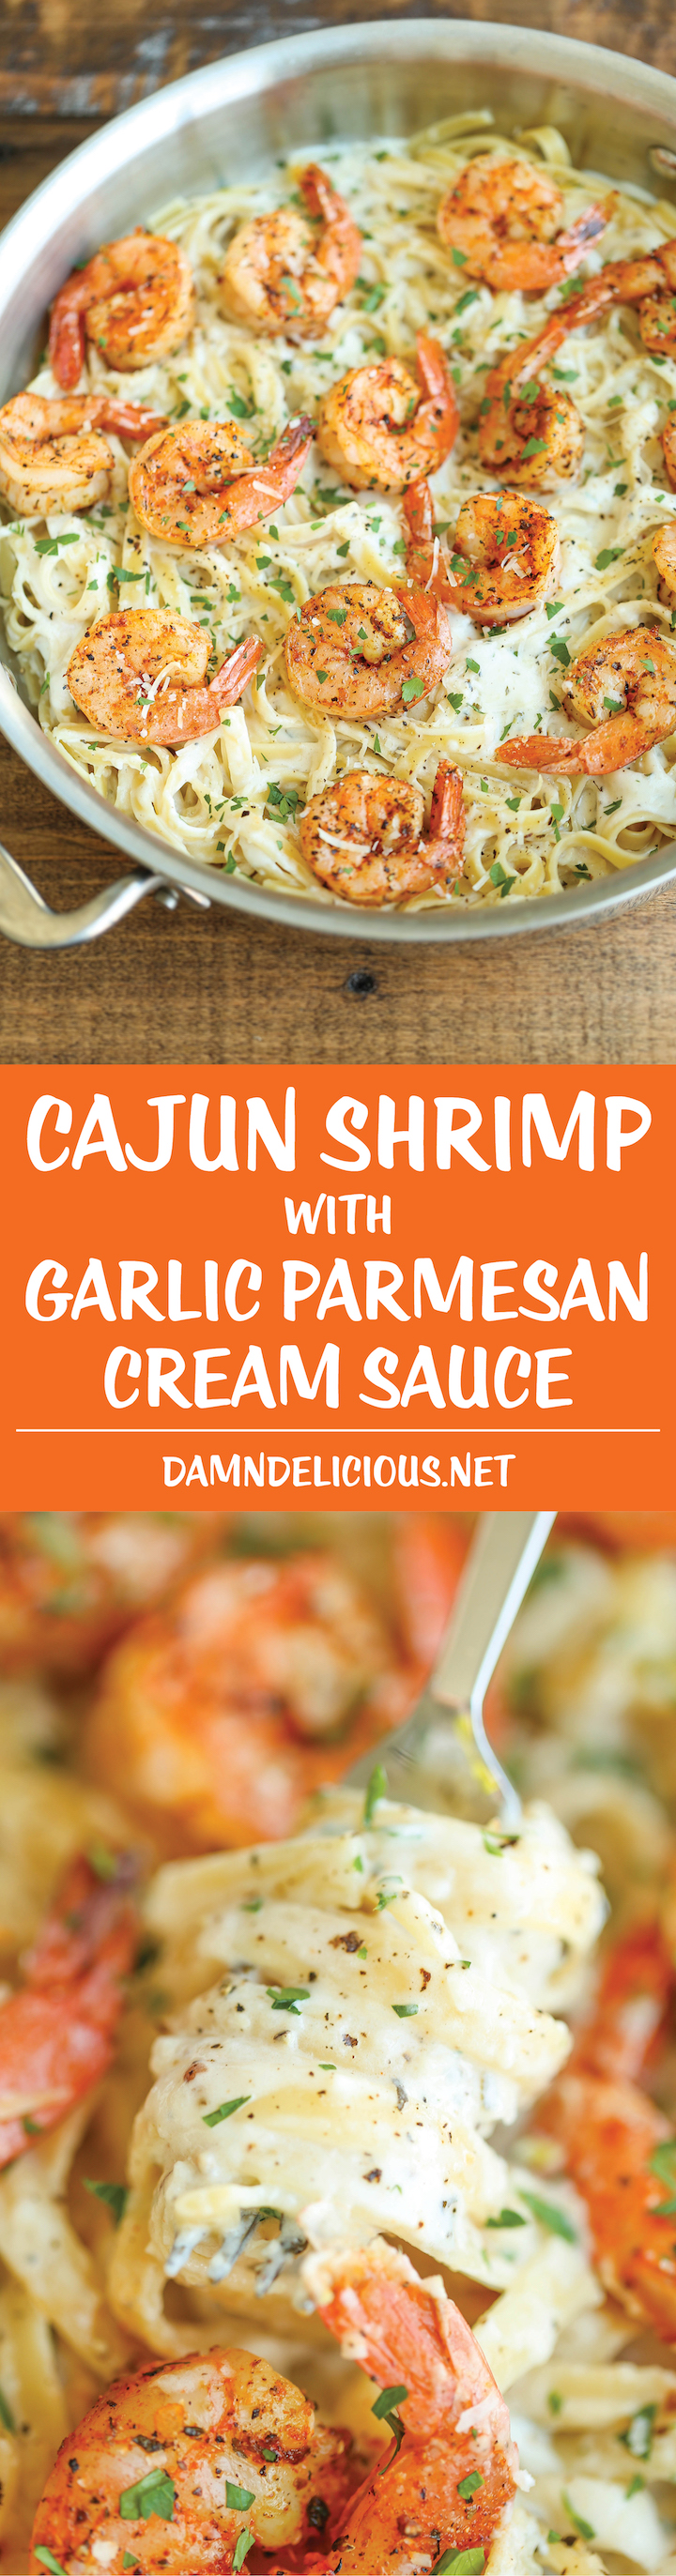 Cajun Shrimp with Garlic Parmesan Cream Sauce - The easiest weeknight meal with a homemade cream sauce that tastes a million times better than store-bought!